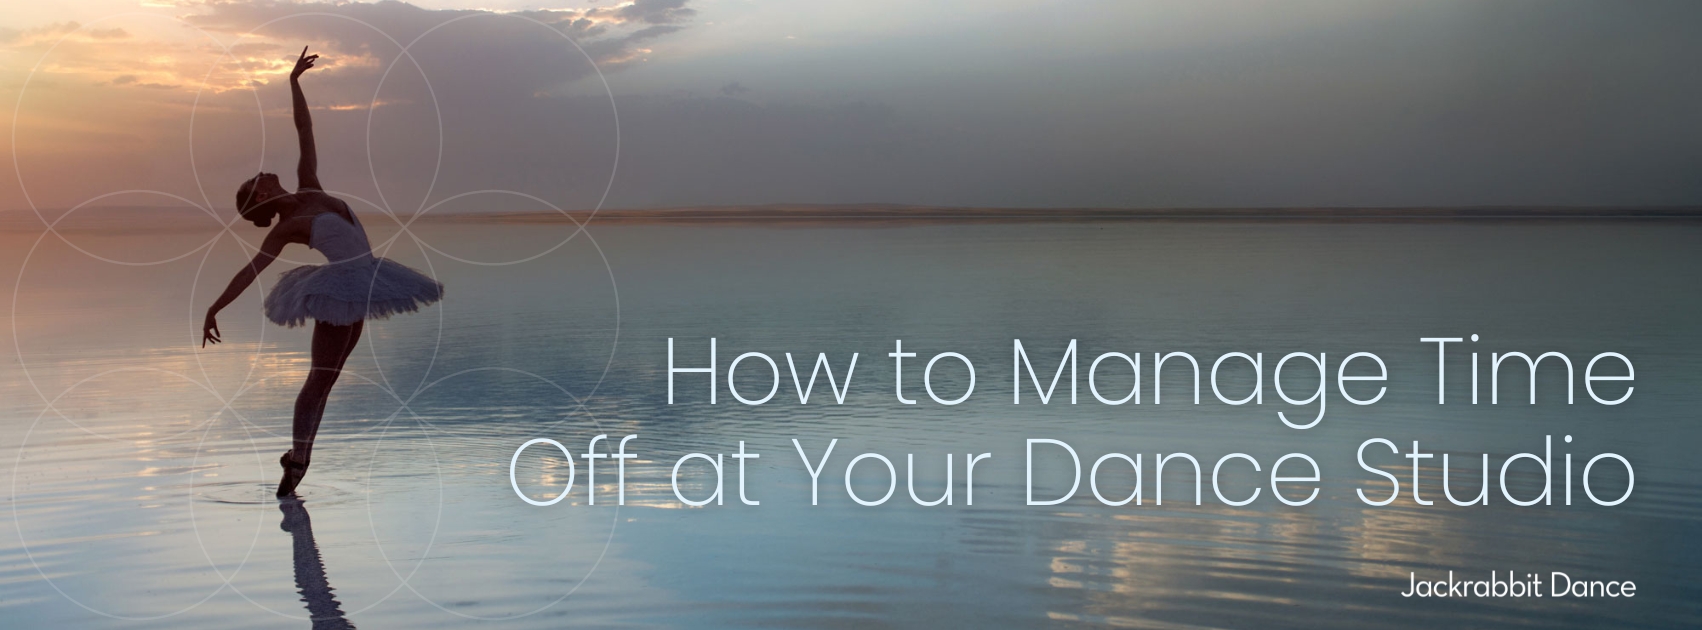 How to manage time off at your dance studio